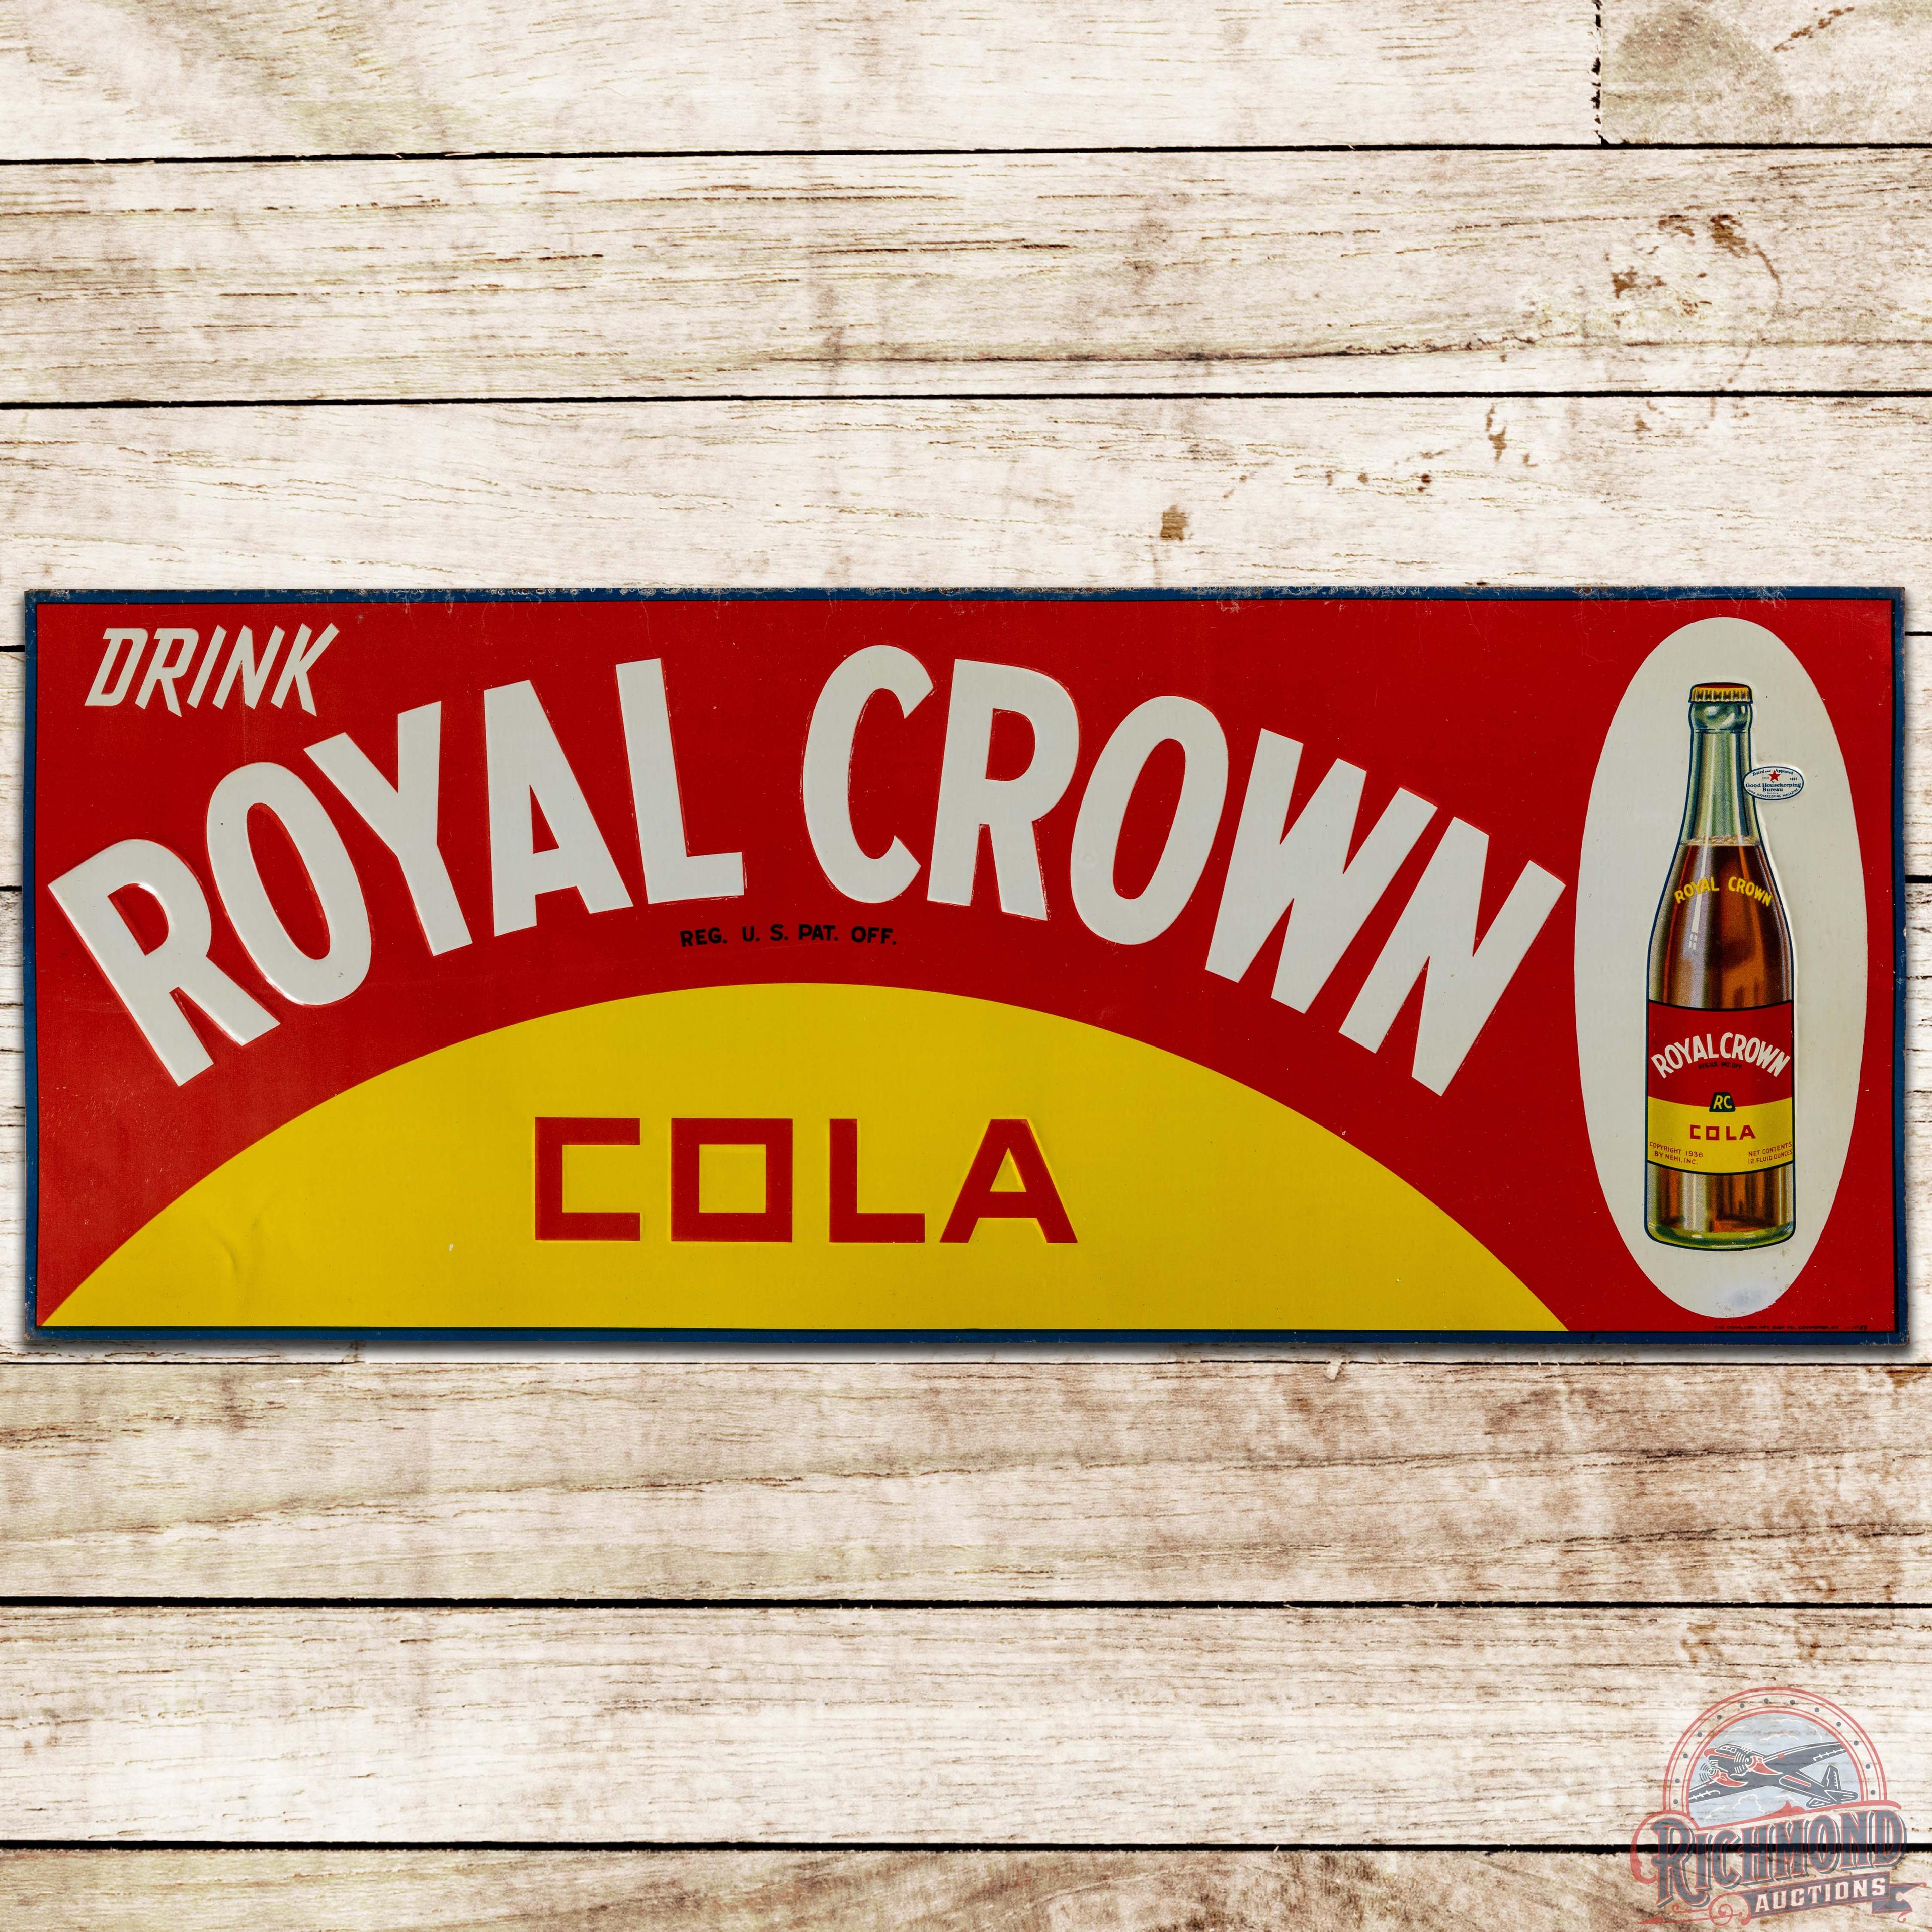 Drink Royal Crown Cola RC Embossed SS Tin Sign w/ Bottle